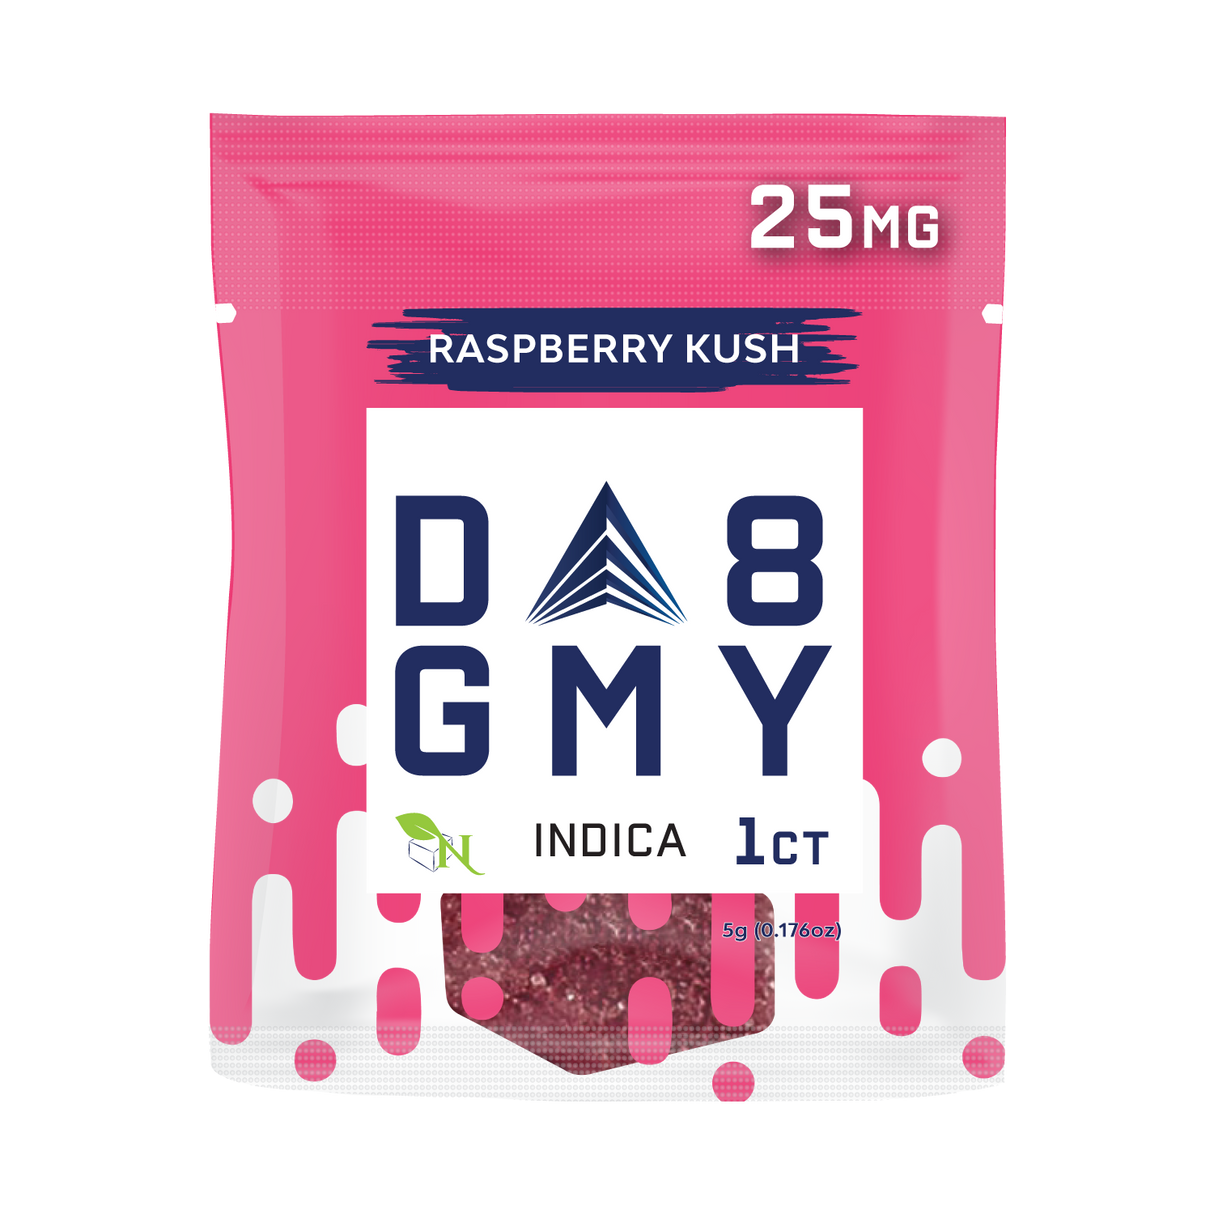 A Gift From Nature Delta-8 Single Indica Gummy 50CT Box: Raspberry Kush